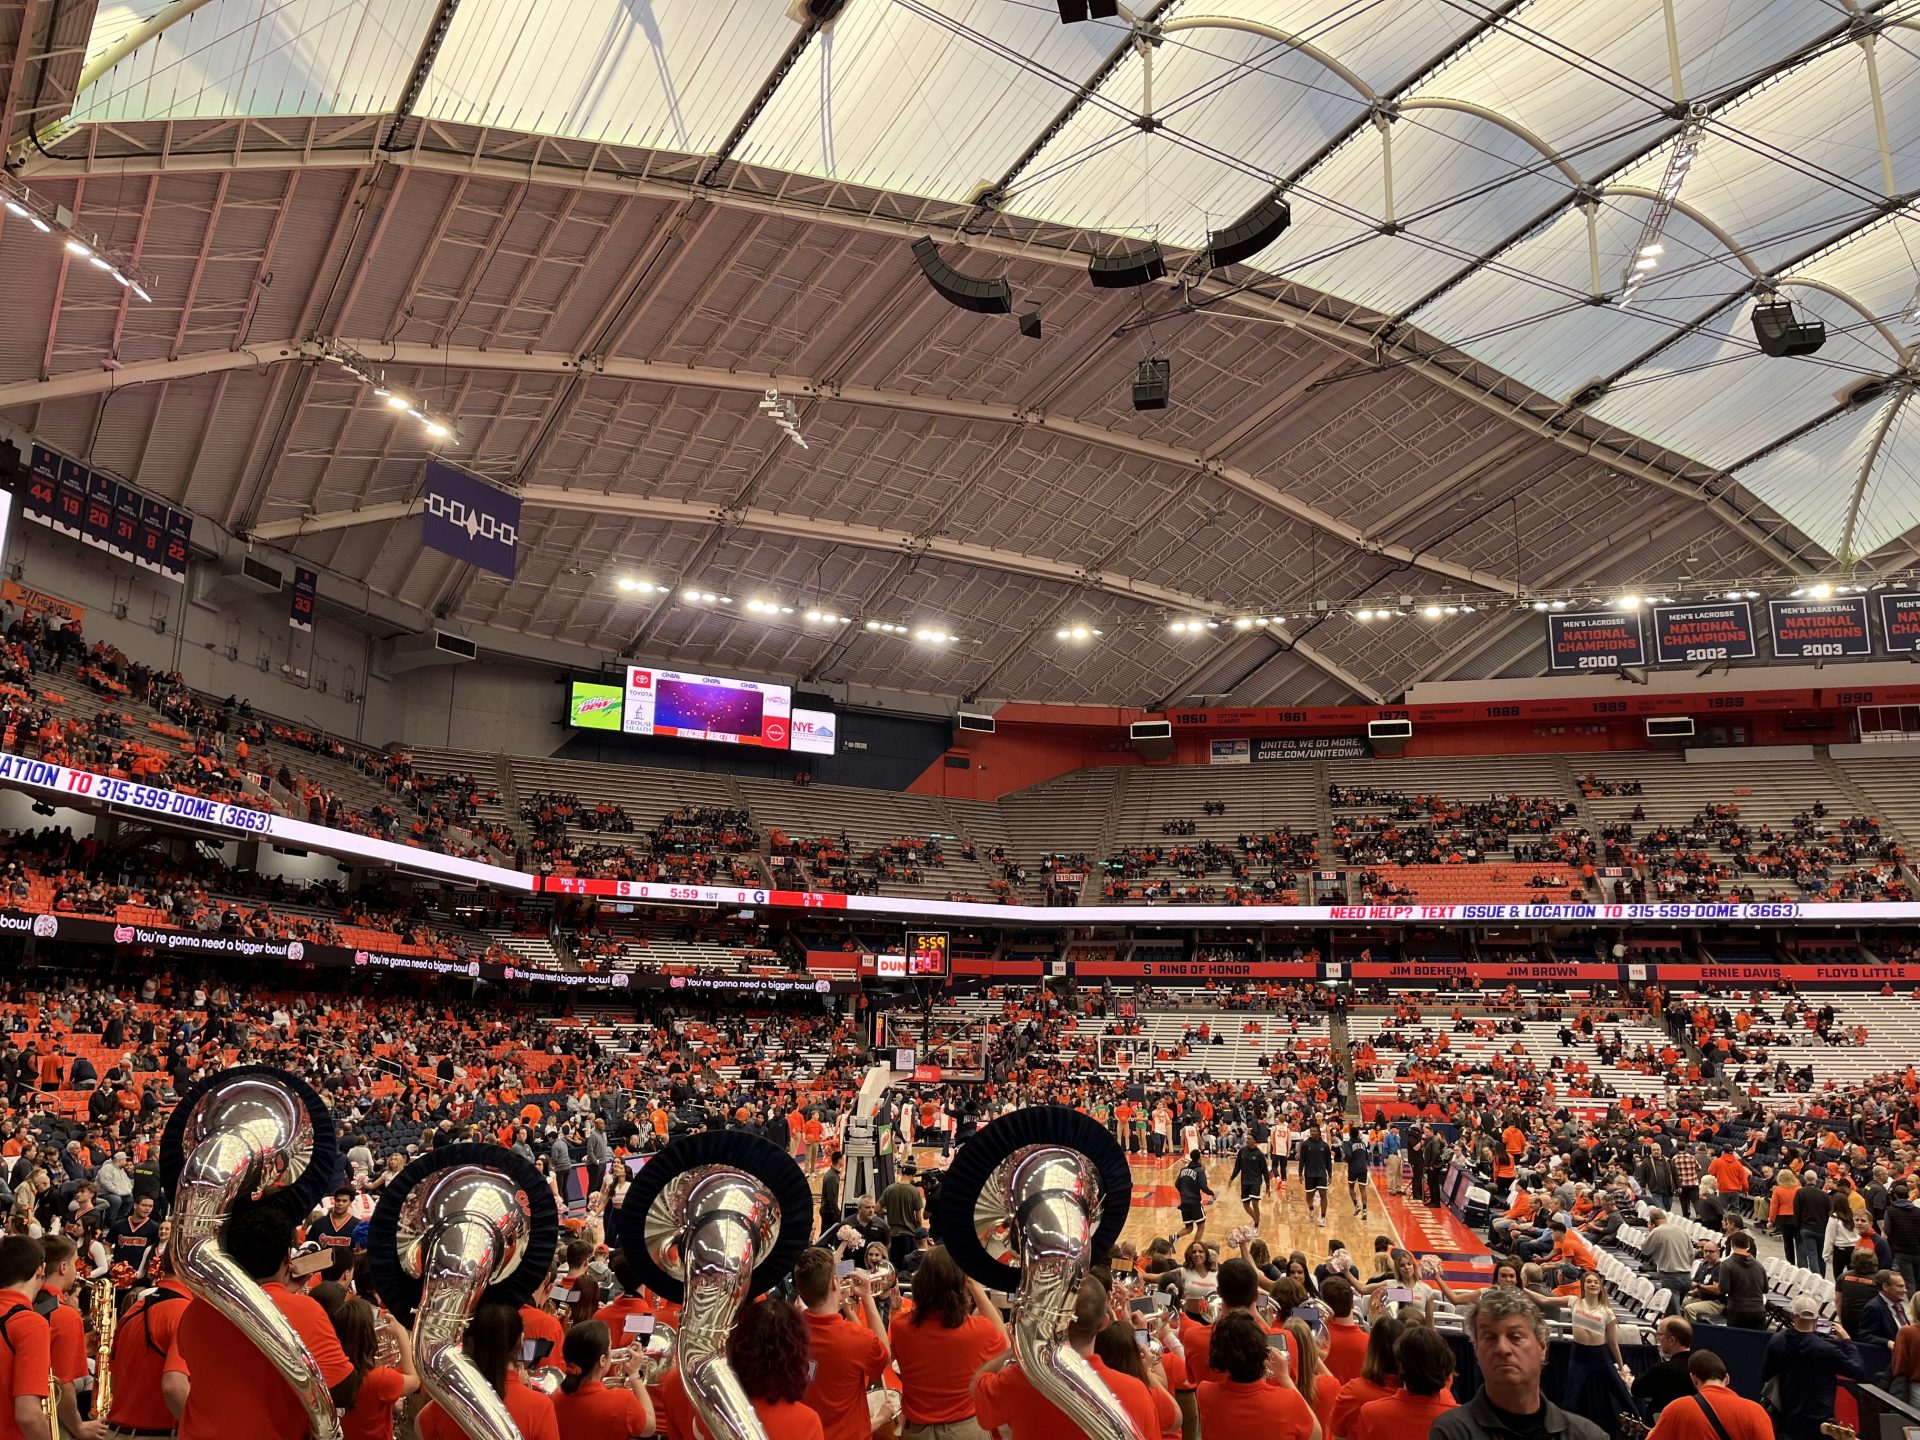 A crowd of people dressed in Syracuse Orange surround a tan basketball court with a grey dome above and a music band at the bottom of the image.